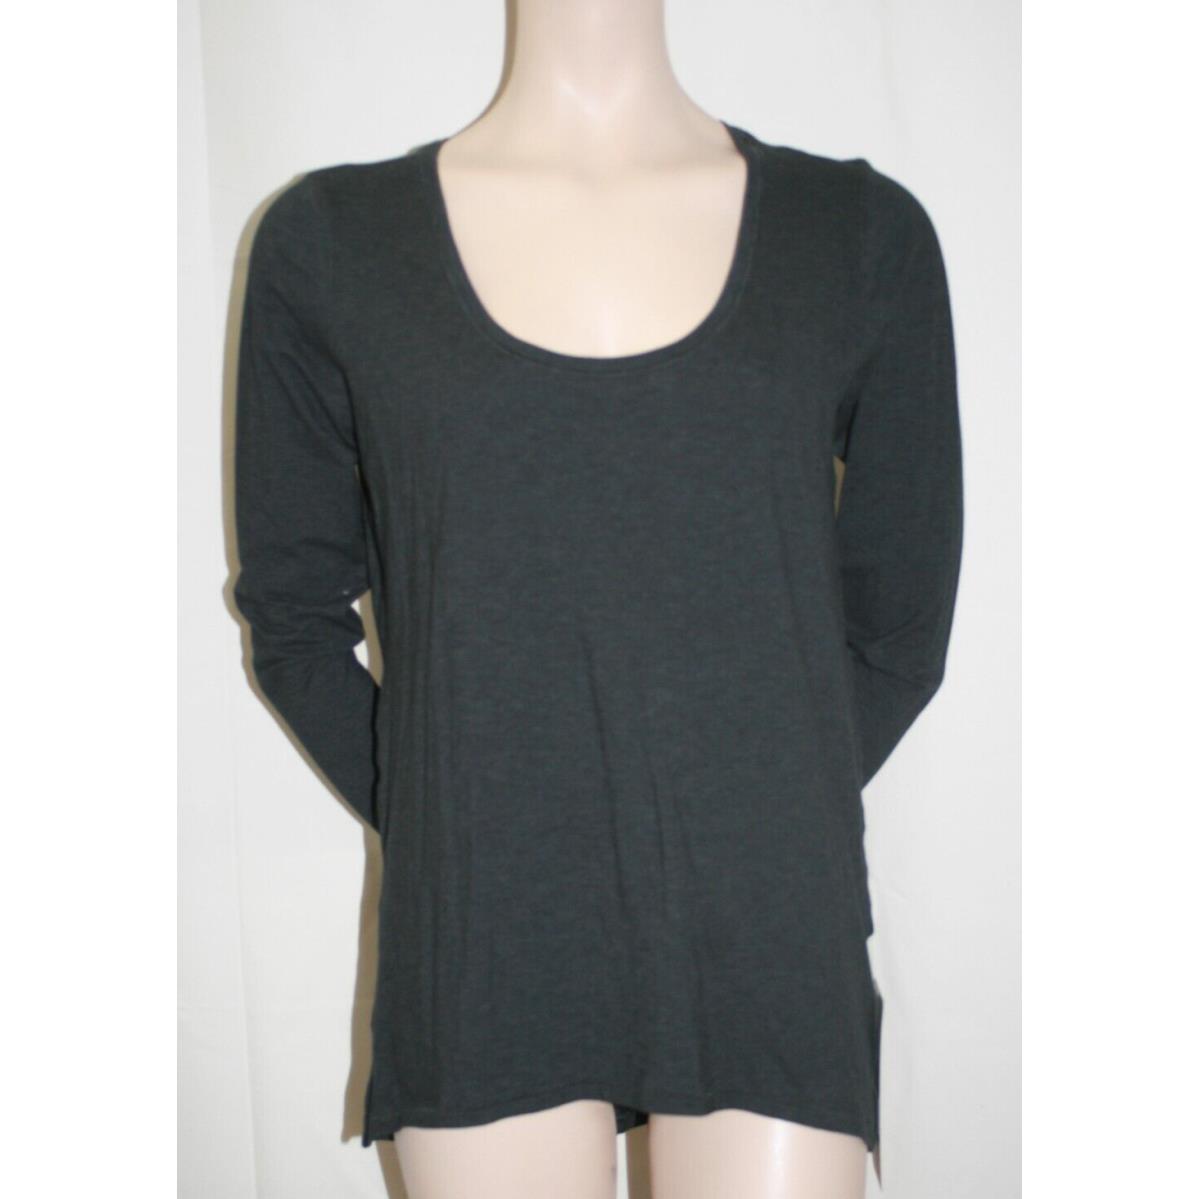 Lululemon Womens Another Round LS Hblk Heathered Black Shirt Top Size: 10